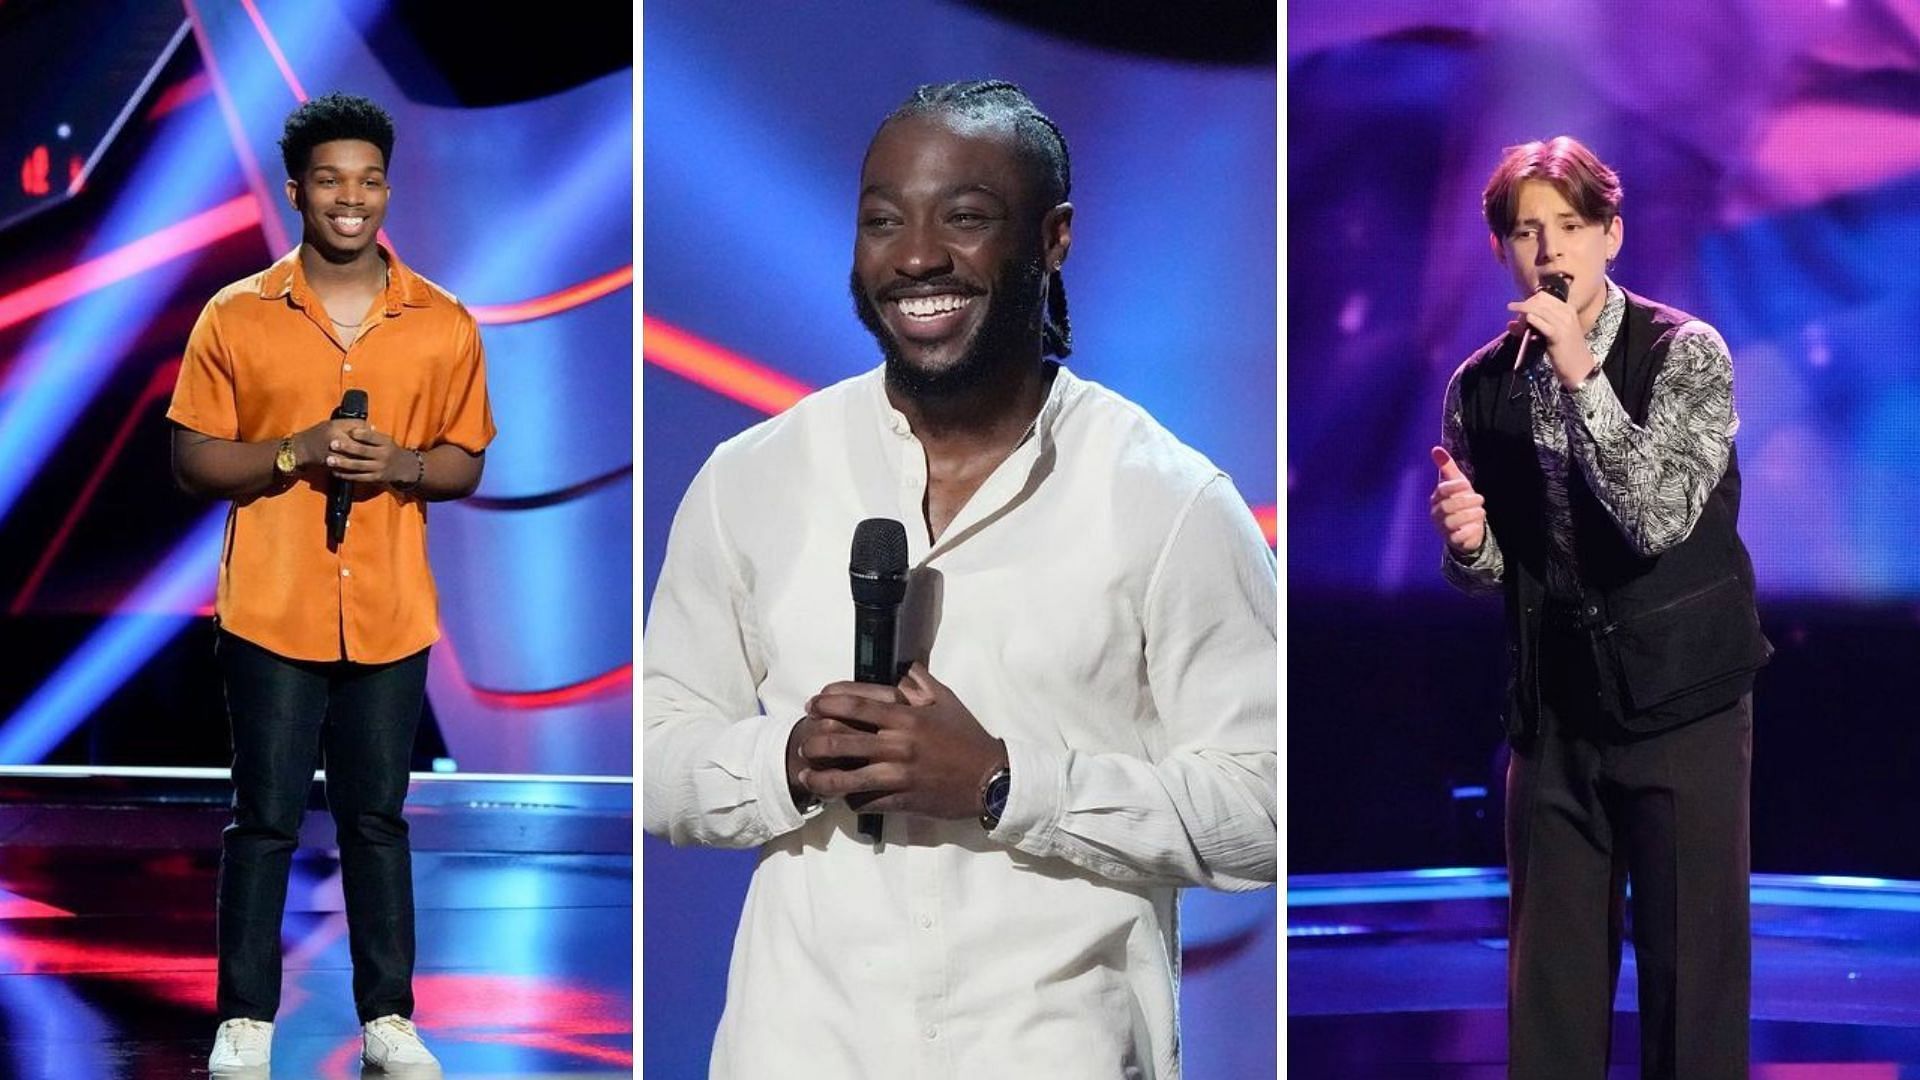 Three Montgomery, Alabama natives have advanced on The Voice 23